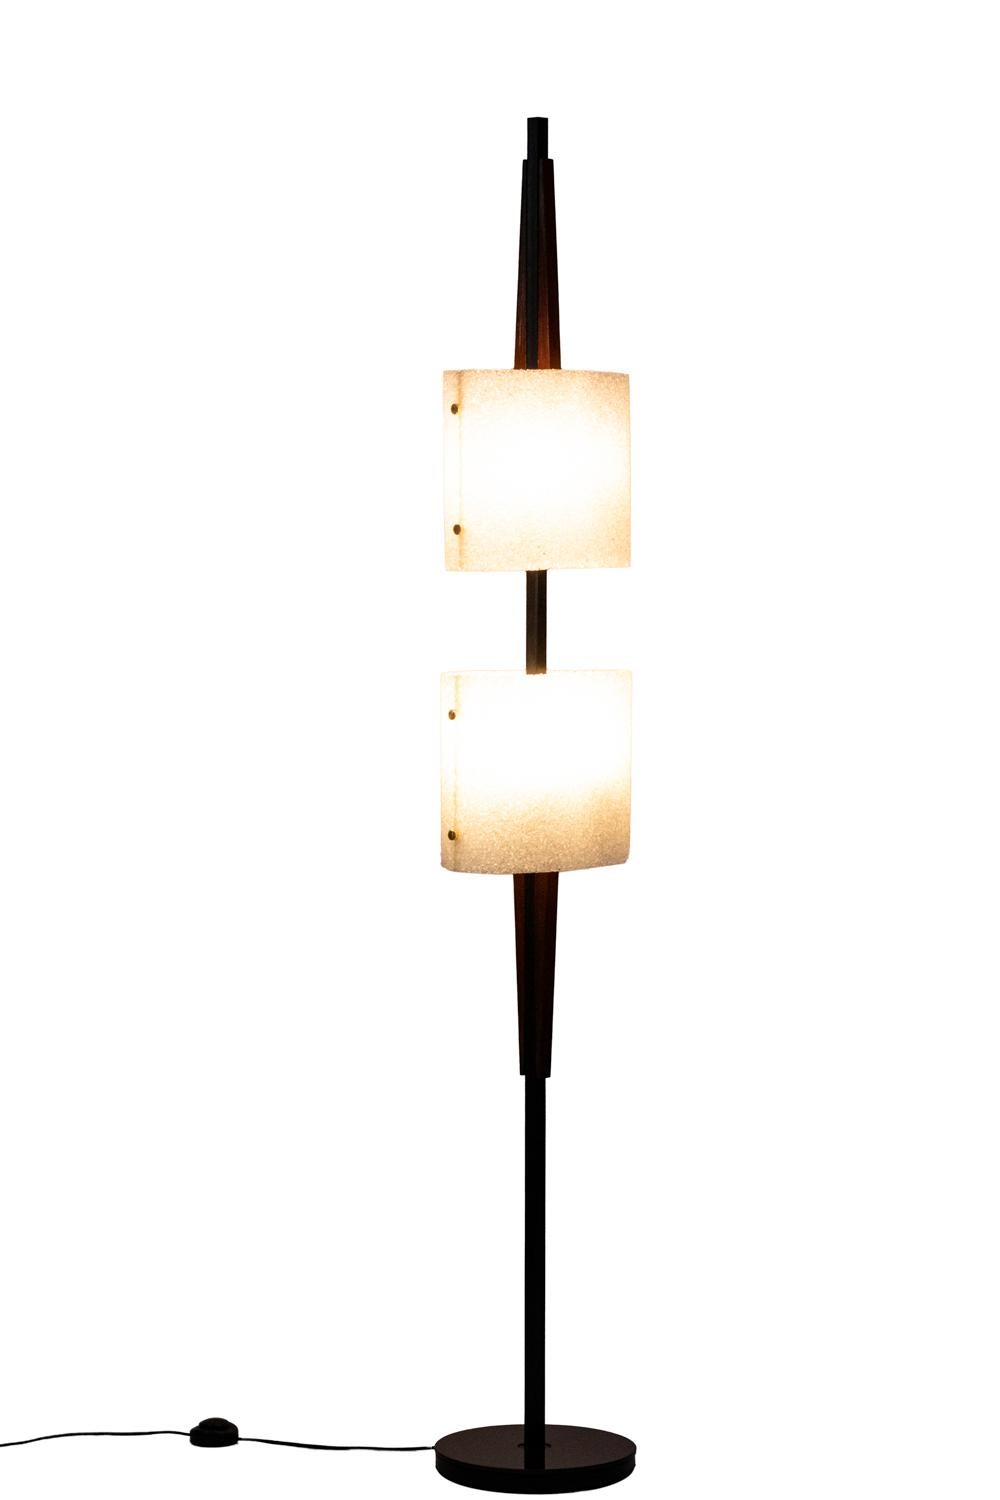 Floor lamp in granite resin and wood with two lights. Navette shape wood and black lacquered metal shaft on which are hung two oval lampshades. Circular wood base.

Work realized in the 1950s.

New and functional electrical system.